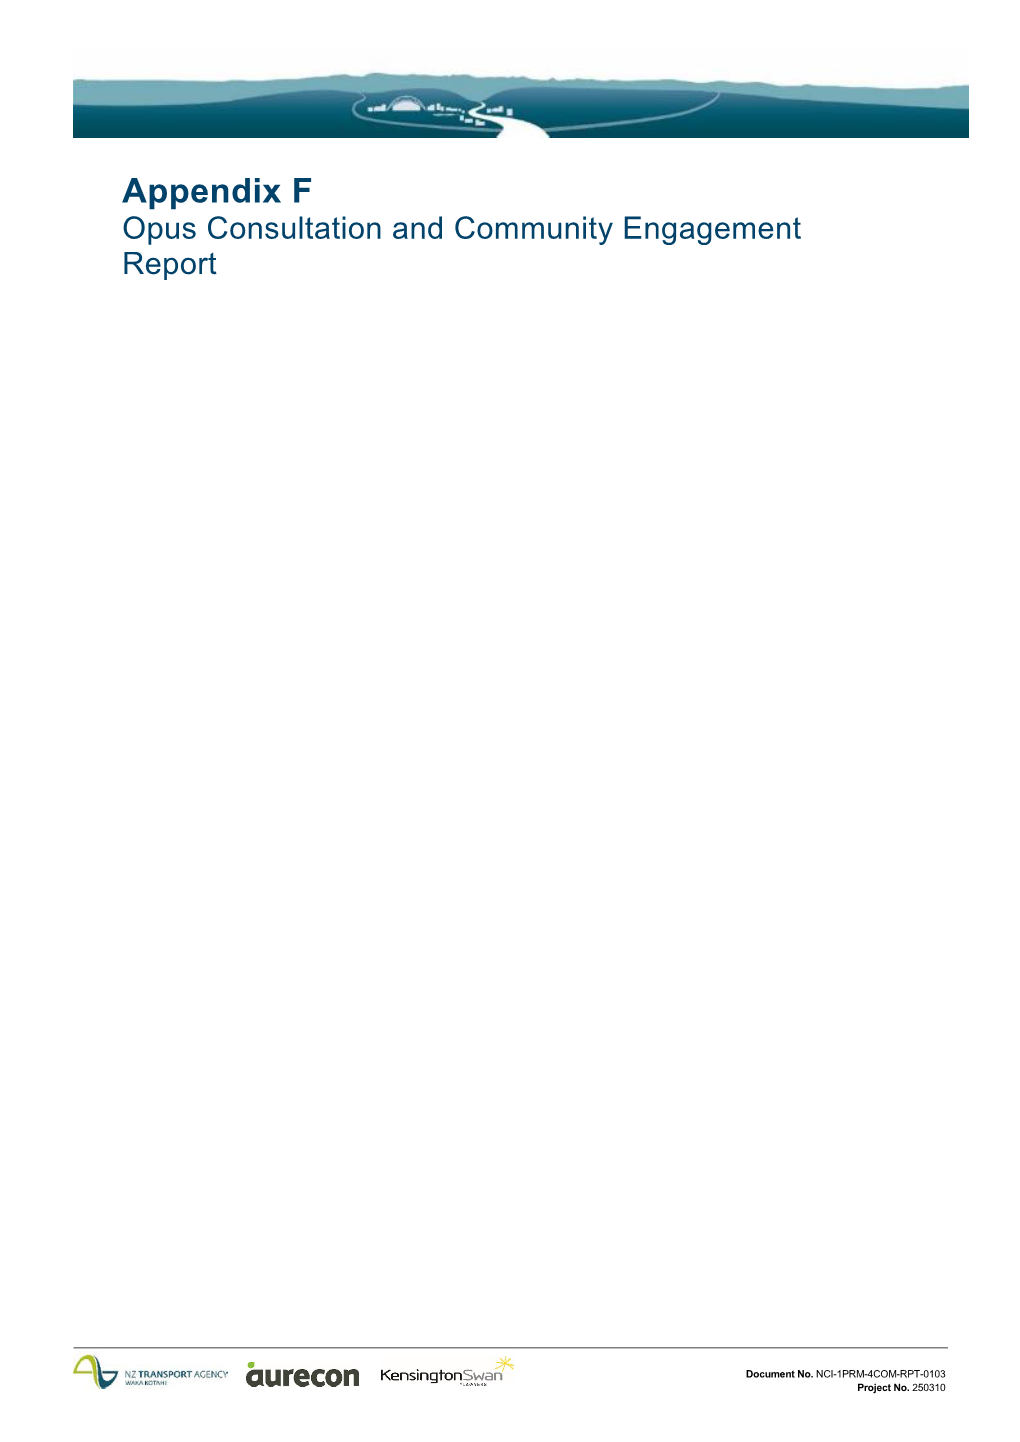 Opus Consultation and Community Engagement Report